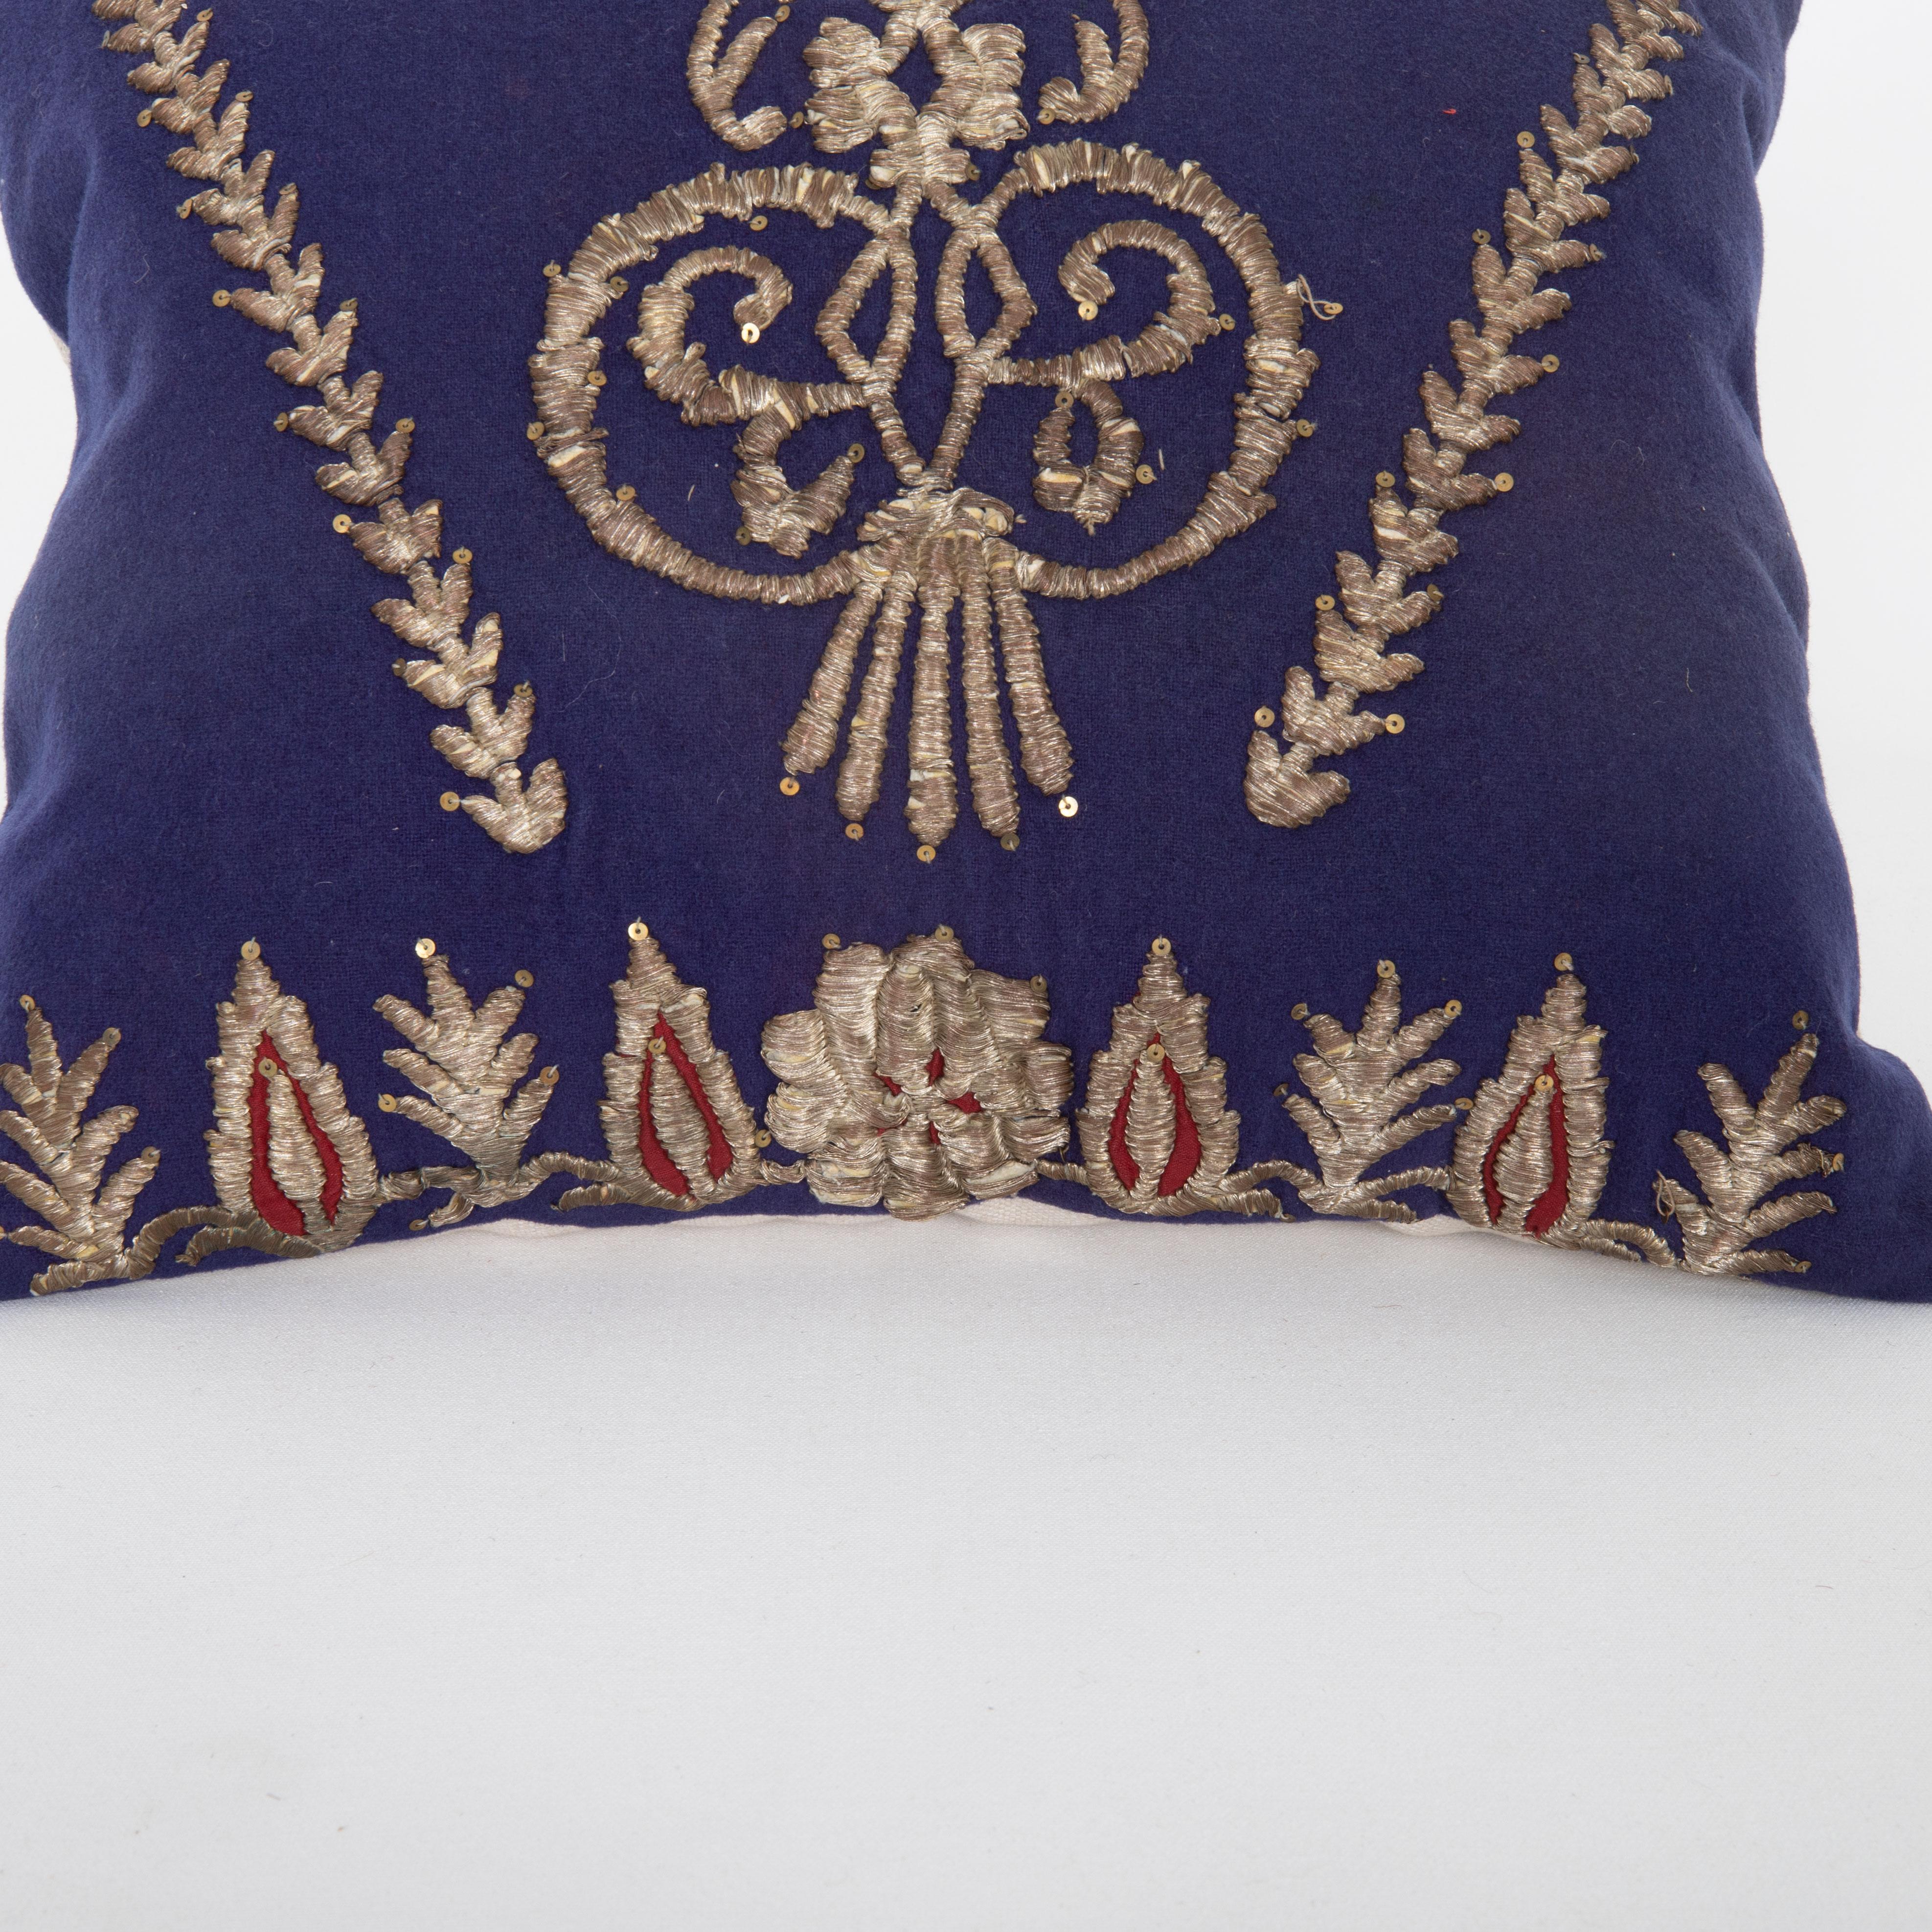 Turkish Pillow Case Made From an E 20th C. Ottoman Sarma Panel